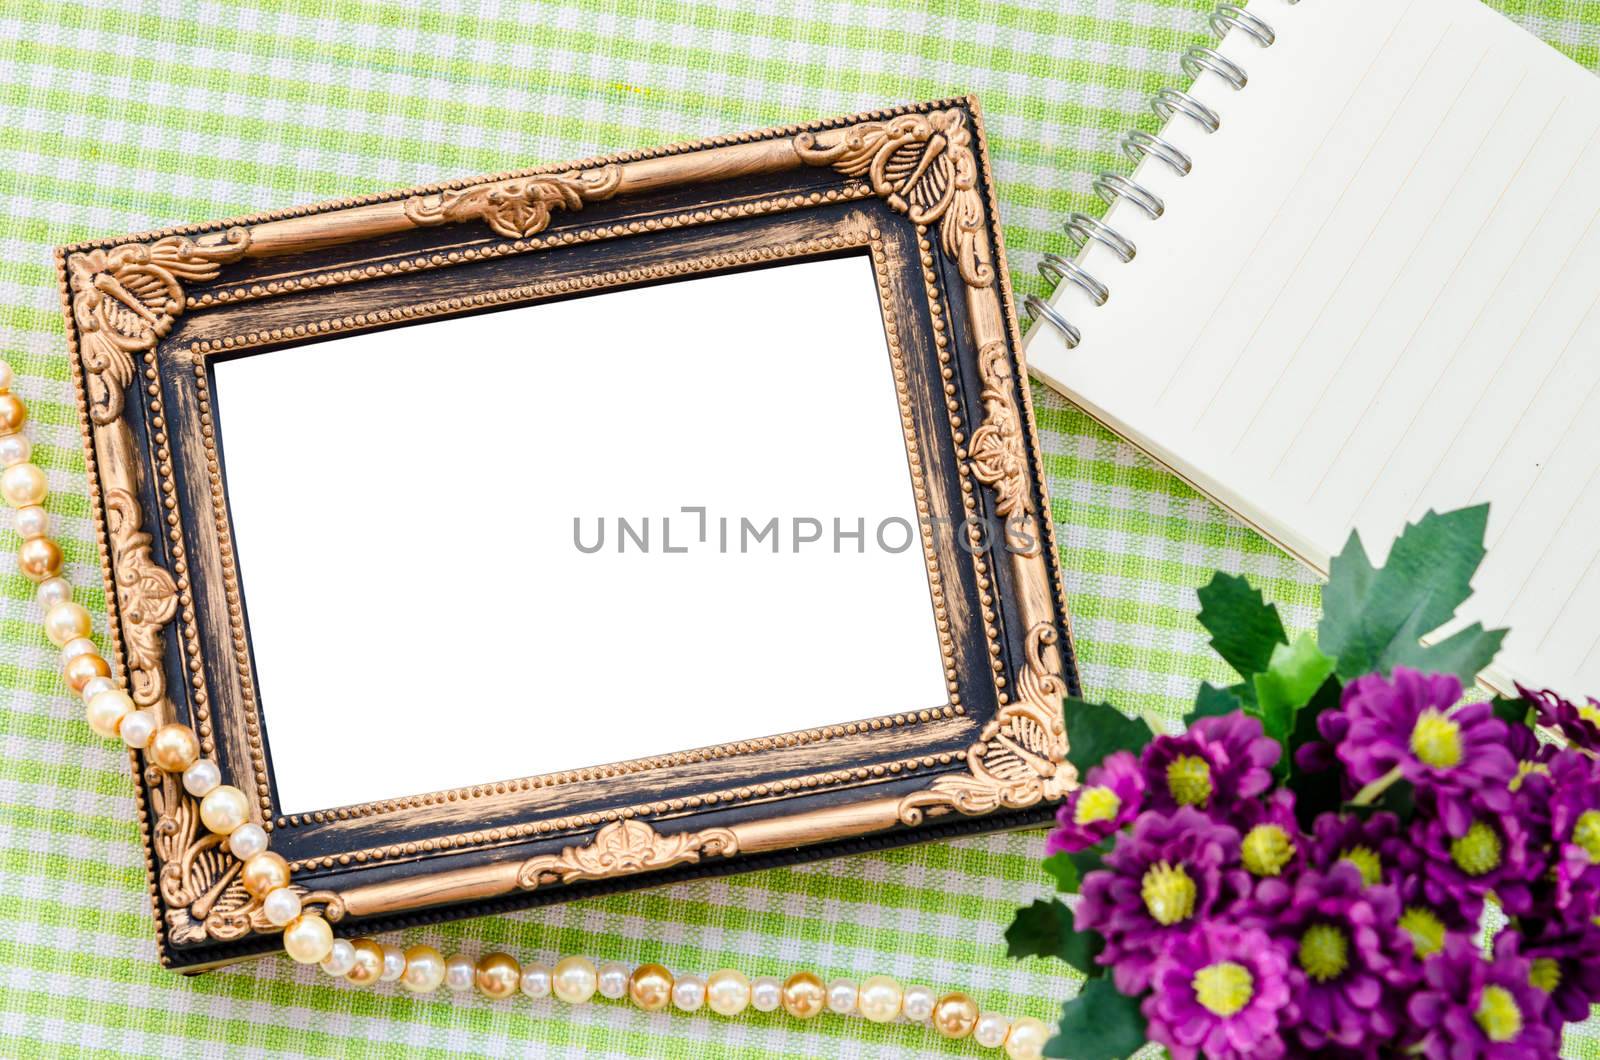 Vintage photo frame with flower on beautiful fabric background. Save clipping path.